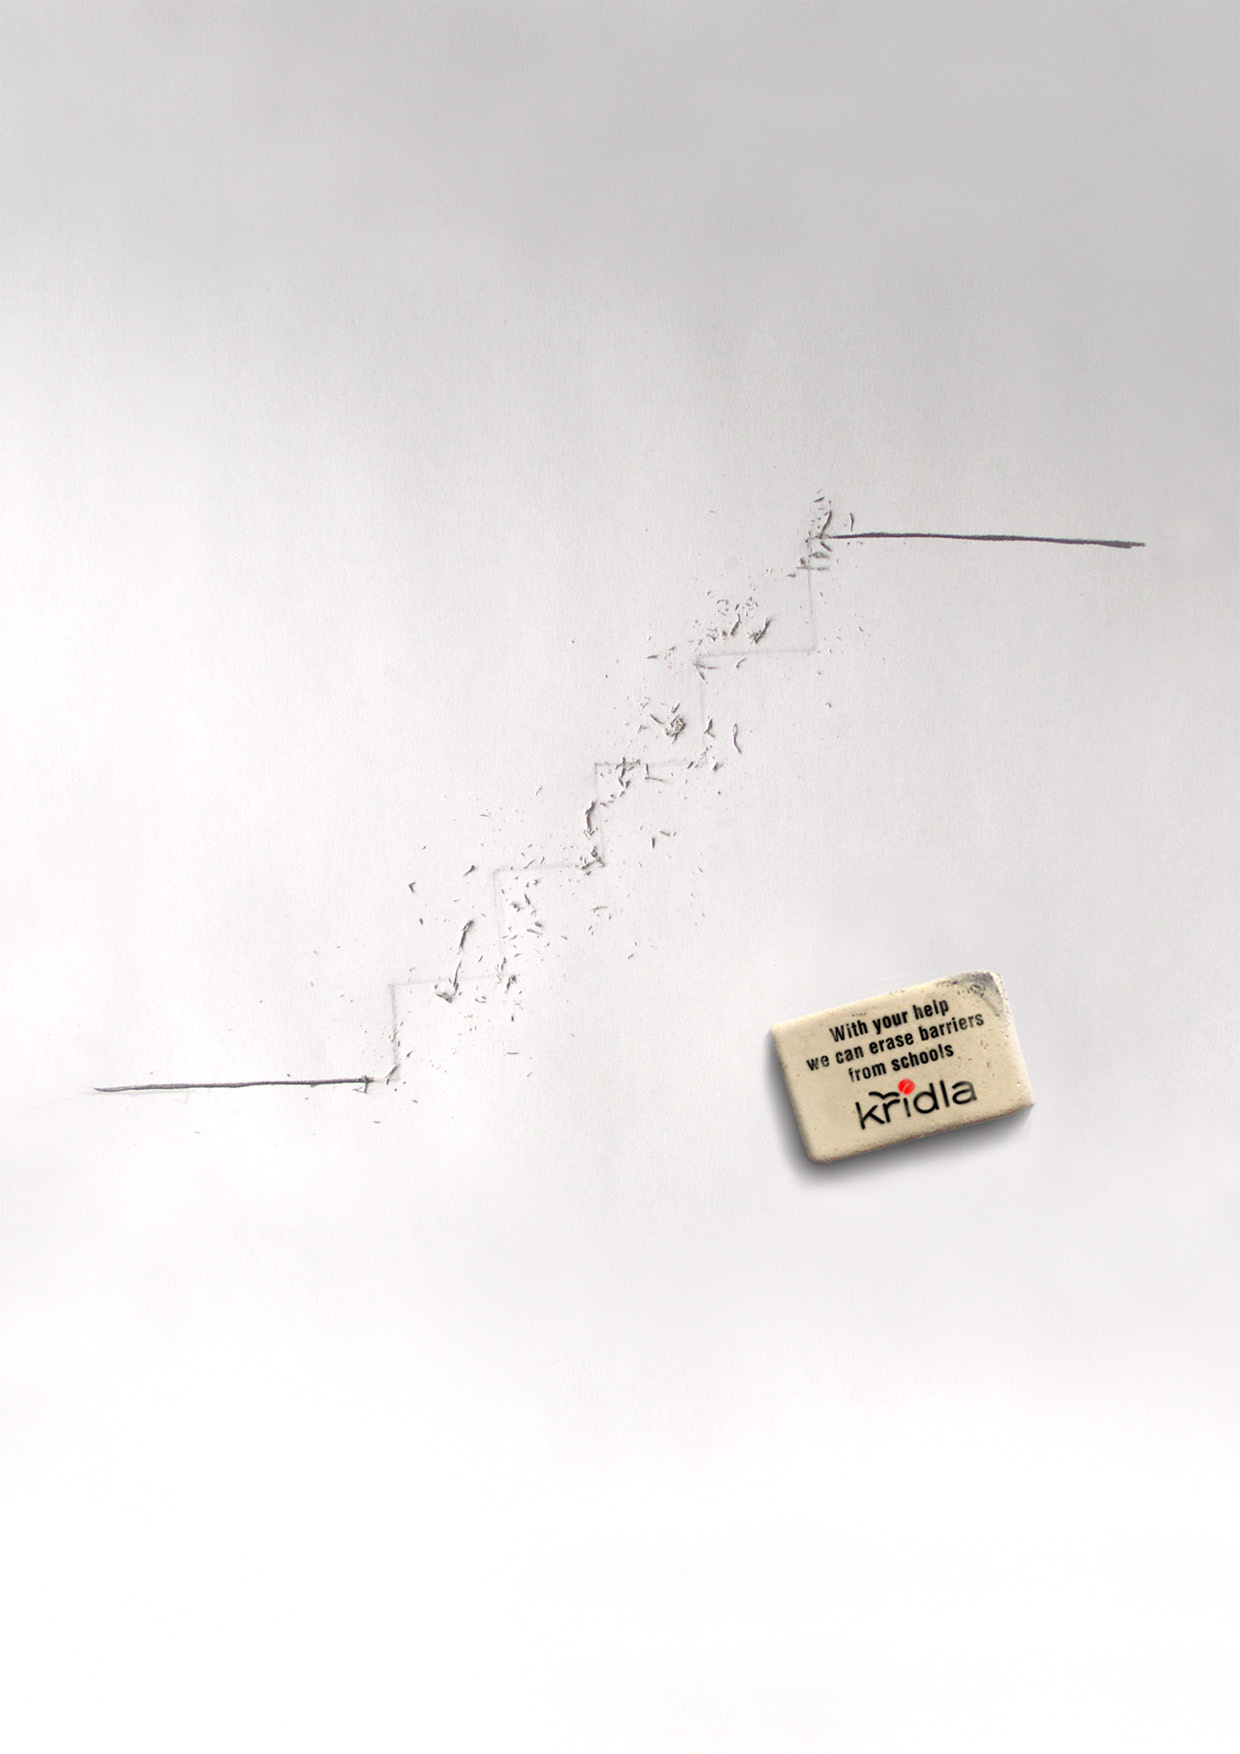 Print Ads Winner Print Erase Barriers for Non-profit